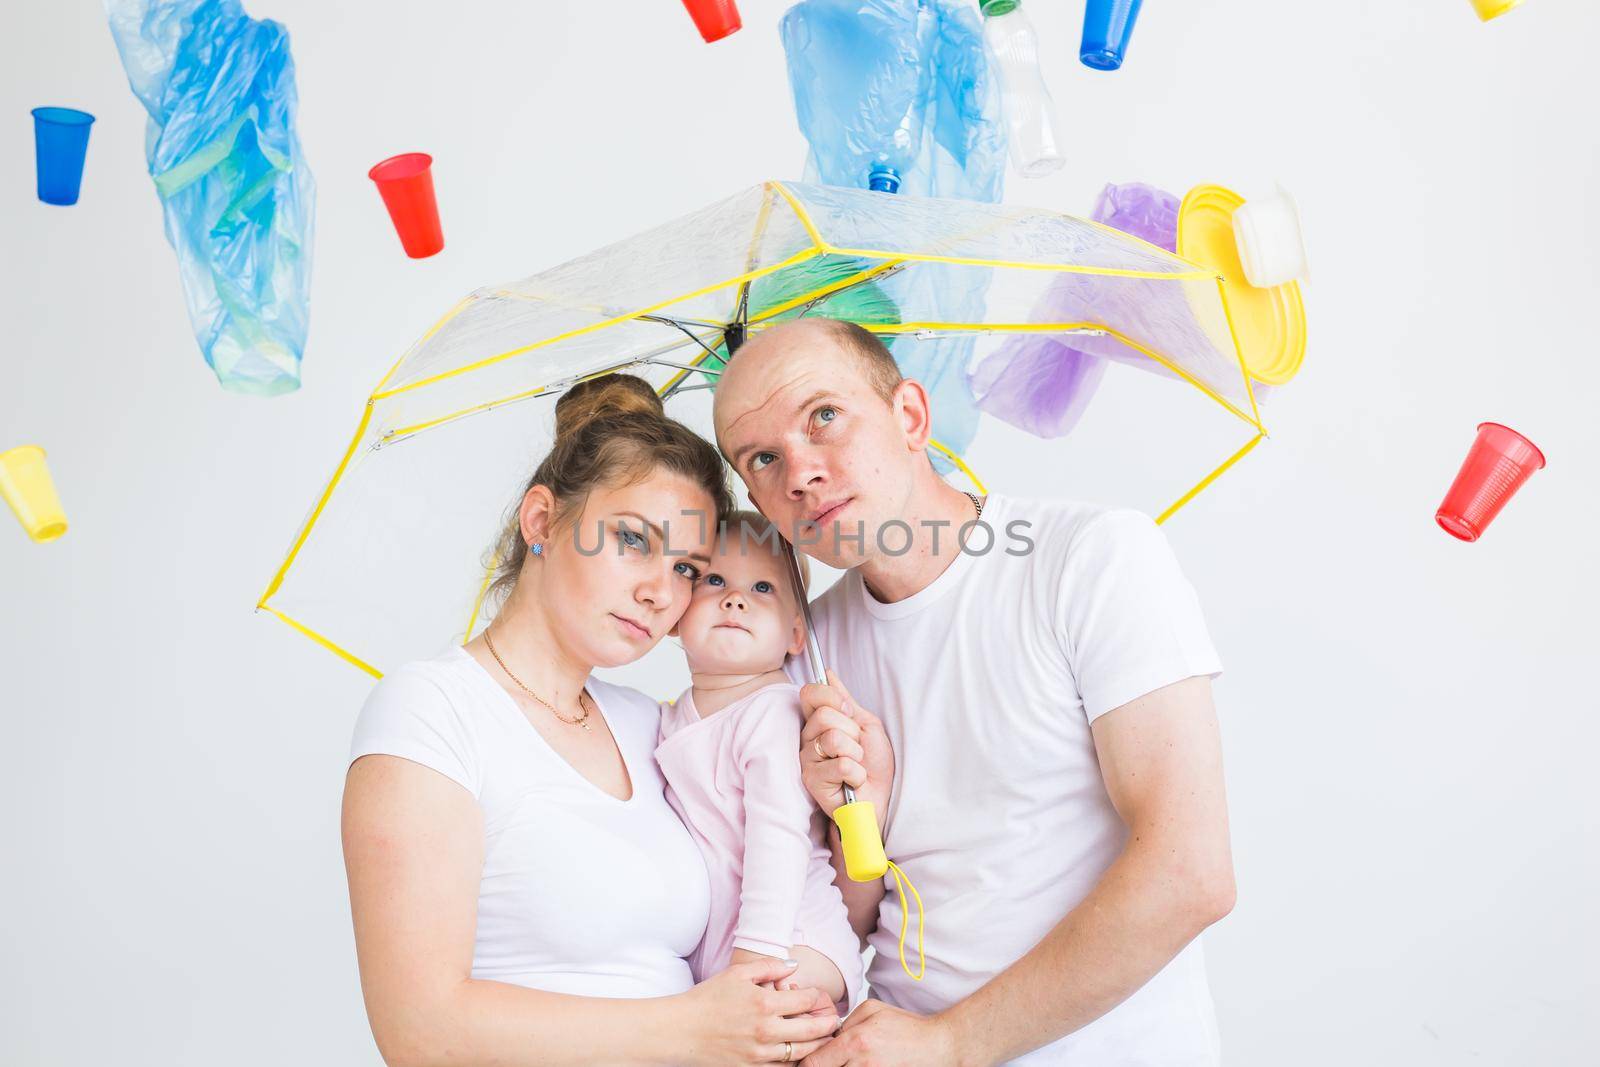 Plastic recycling problem, ecology and environmental disaster concept - family hiding from garbage under an umbrella on white background by Satura86